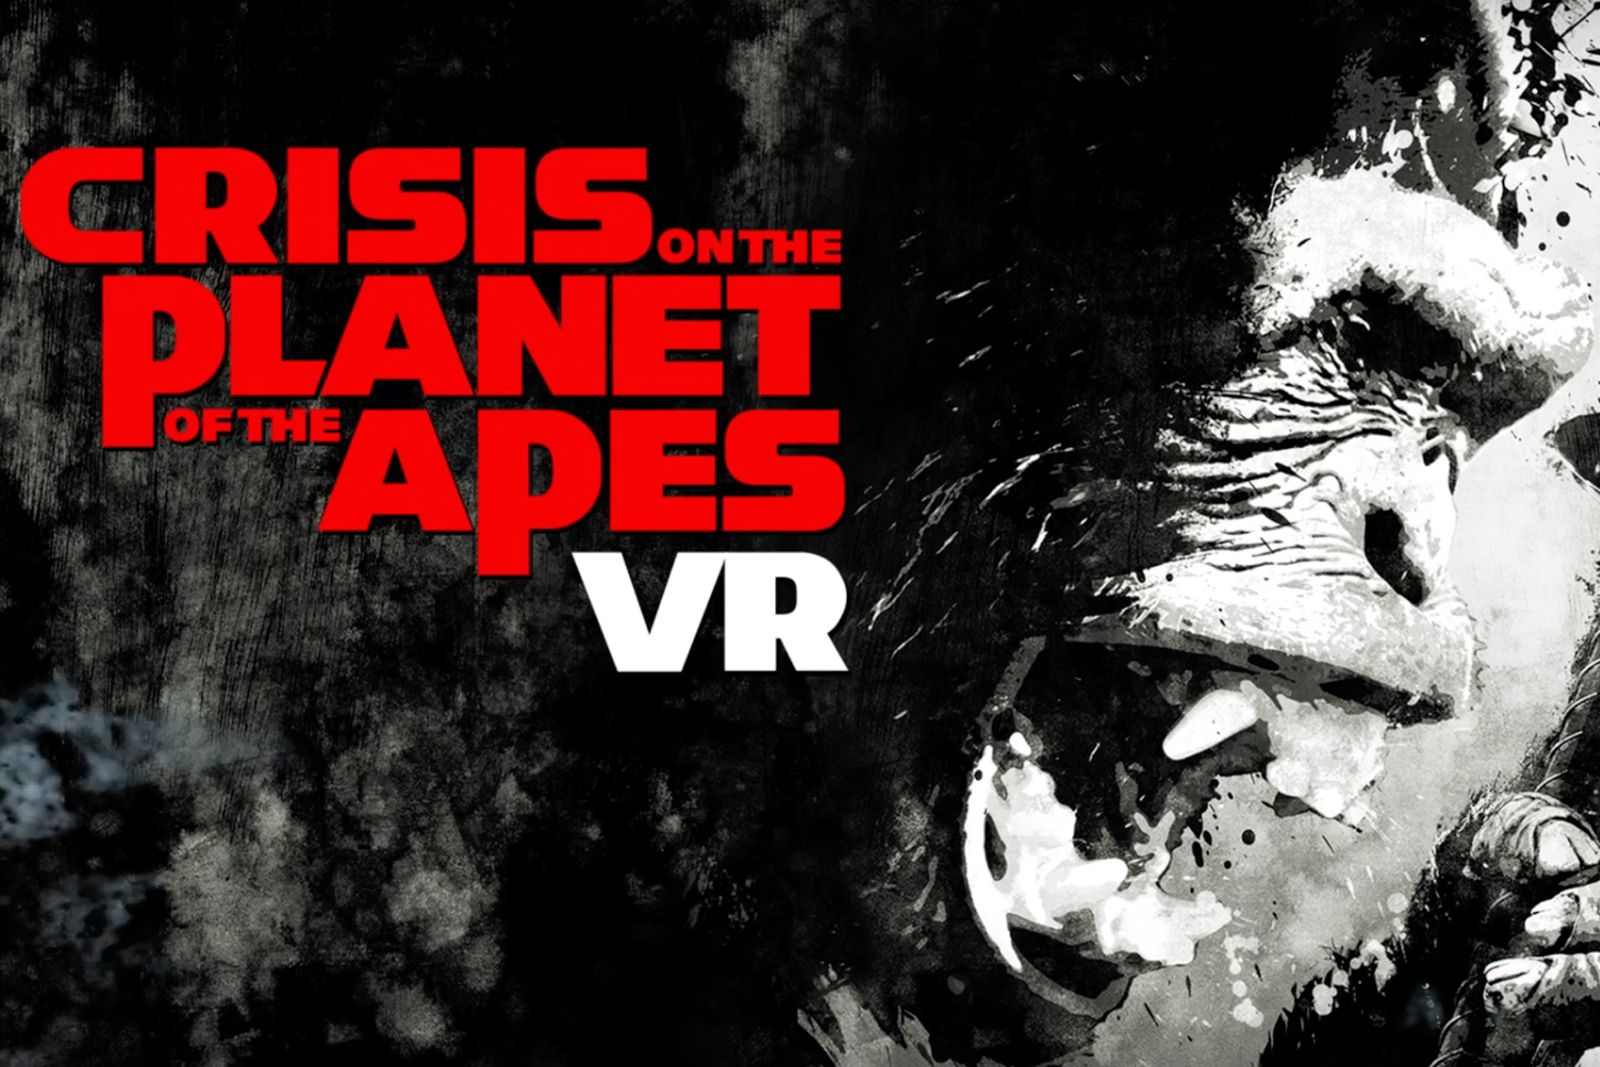 Channel your inner ape with Crisis on the Planet of the Apes VR image 1